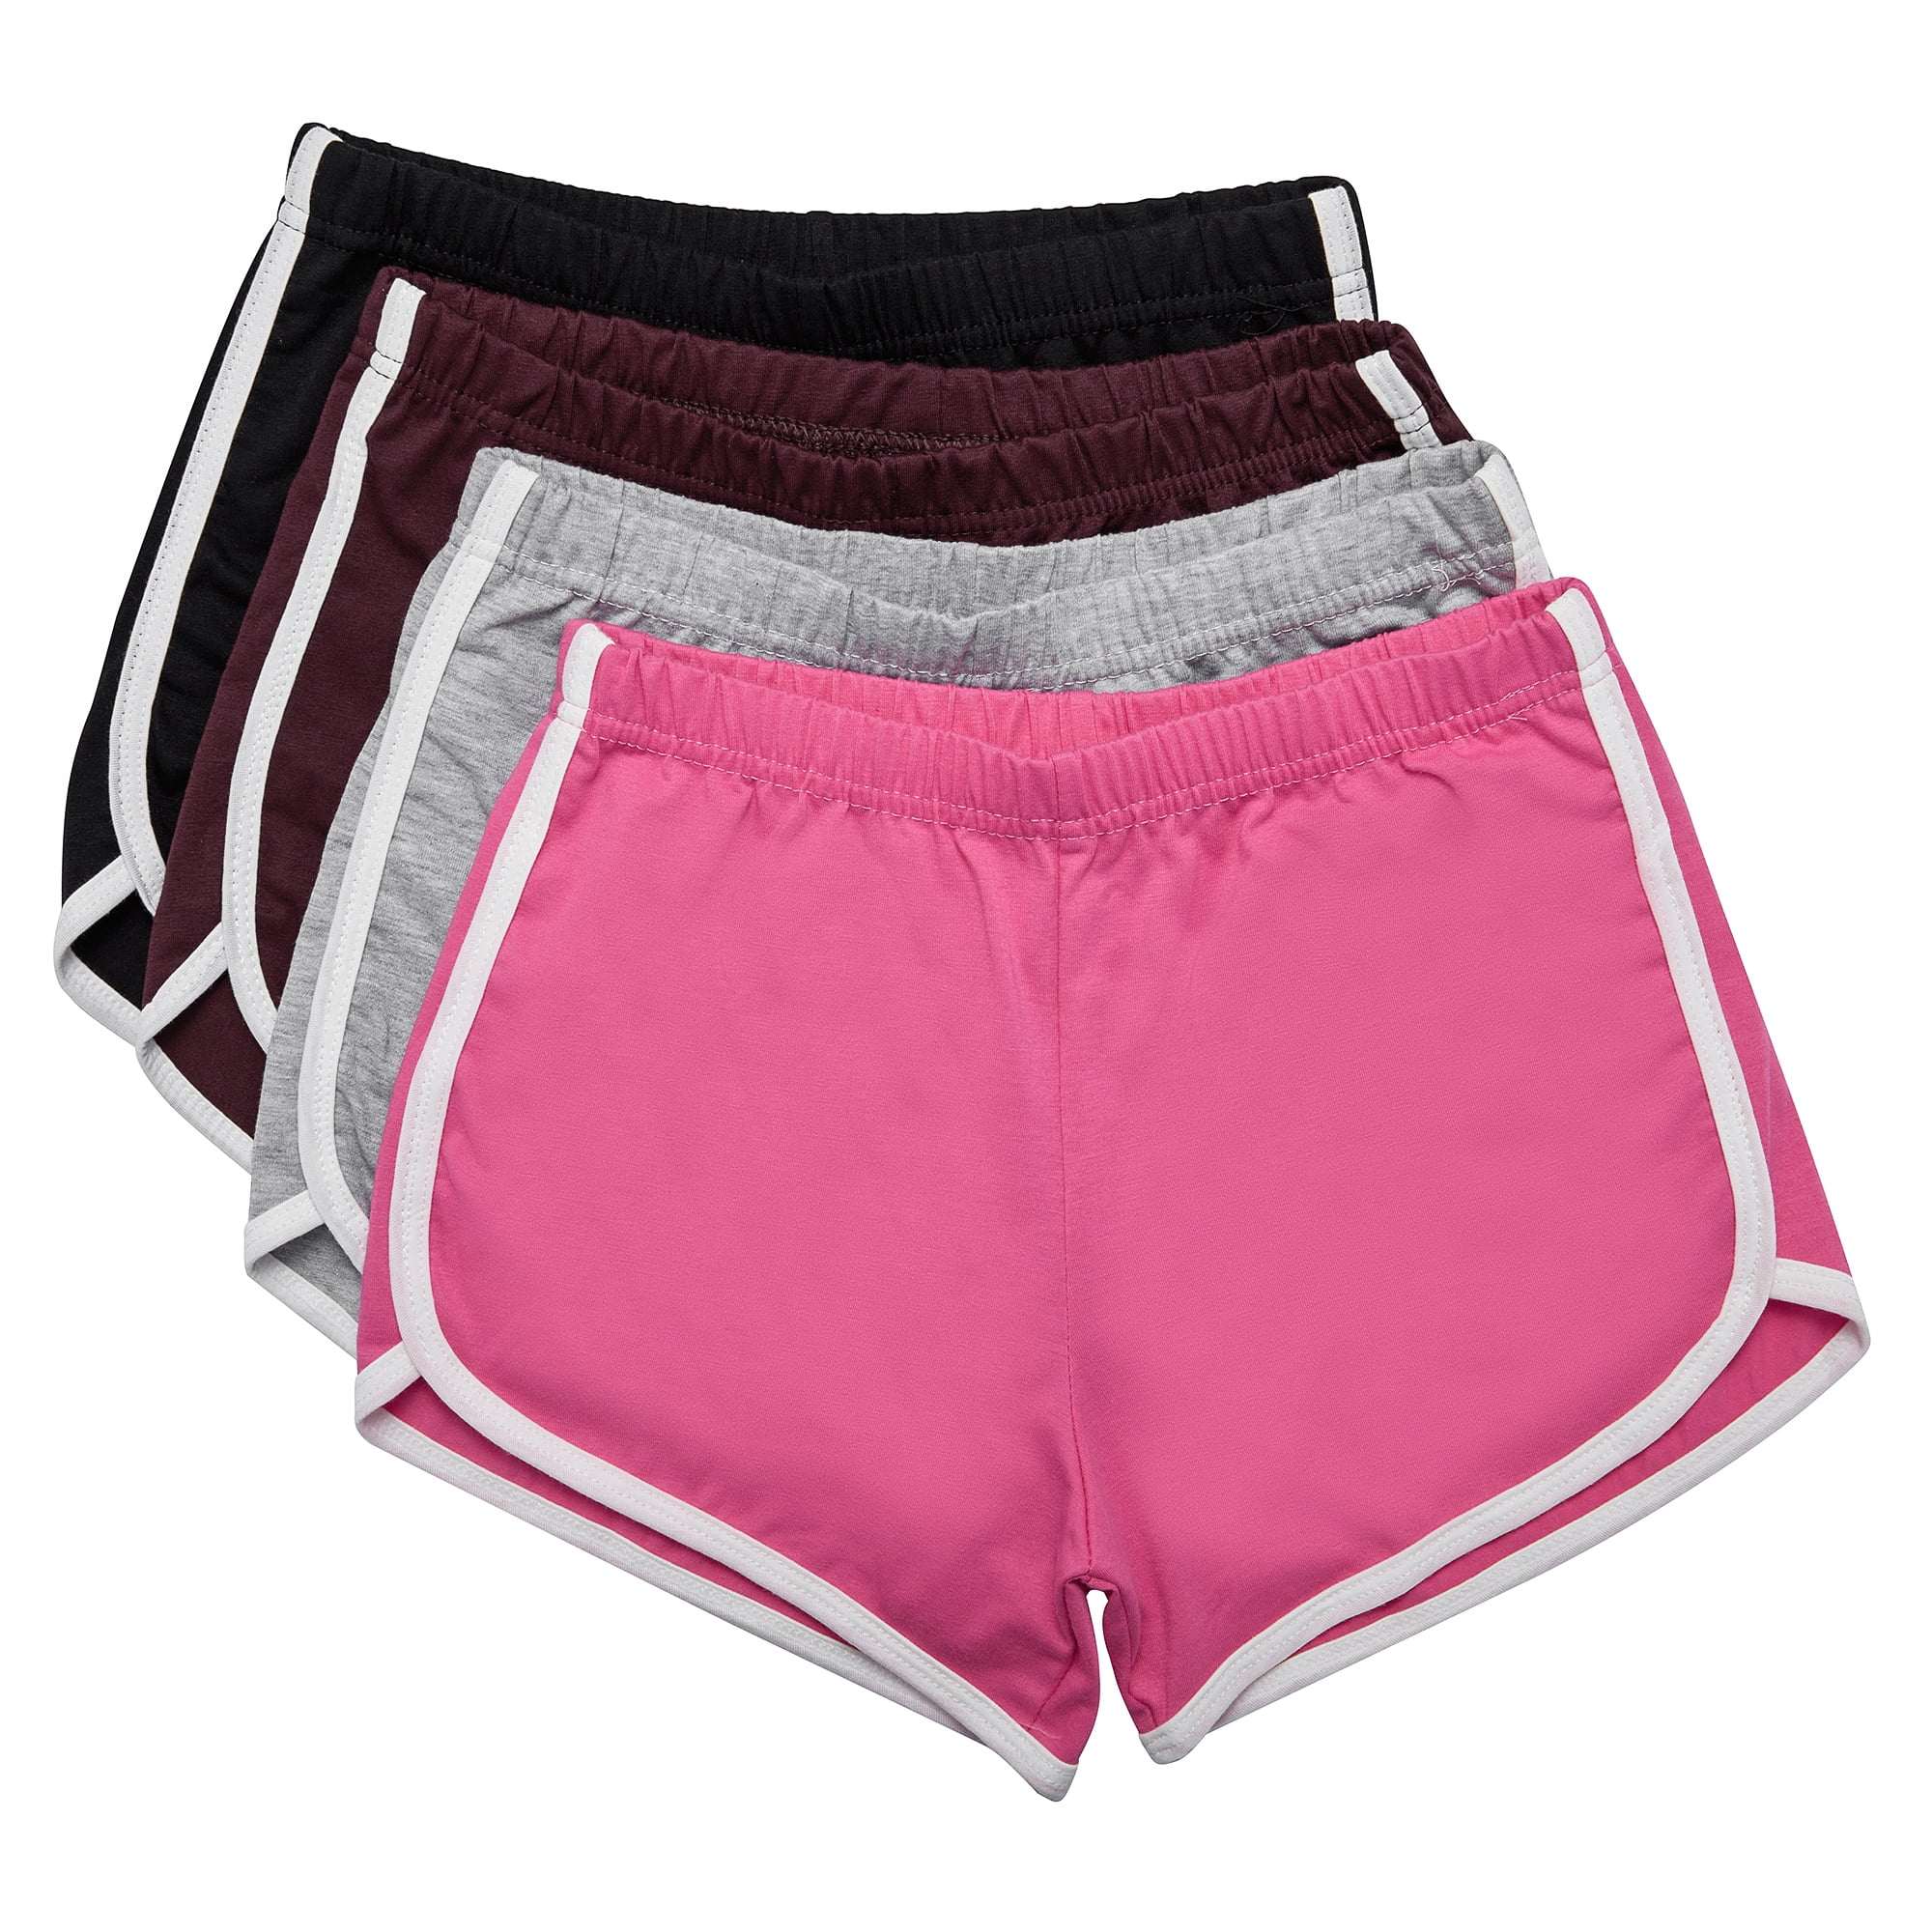 Shorts Woman Shorts Hot Pant Sport Fitness Dance Cotton Sexy New FC-17 